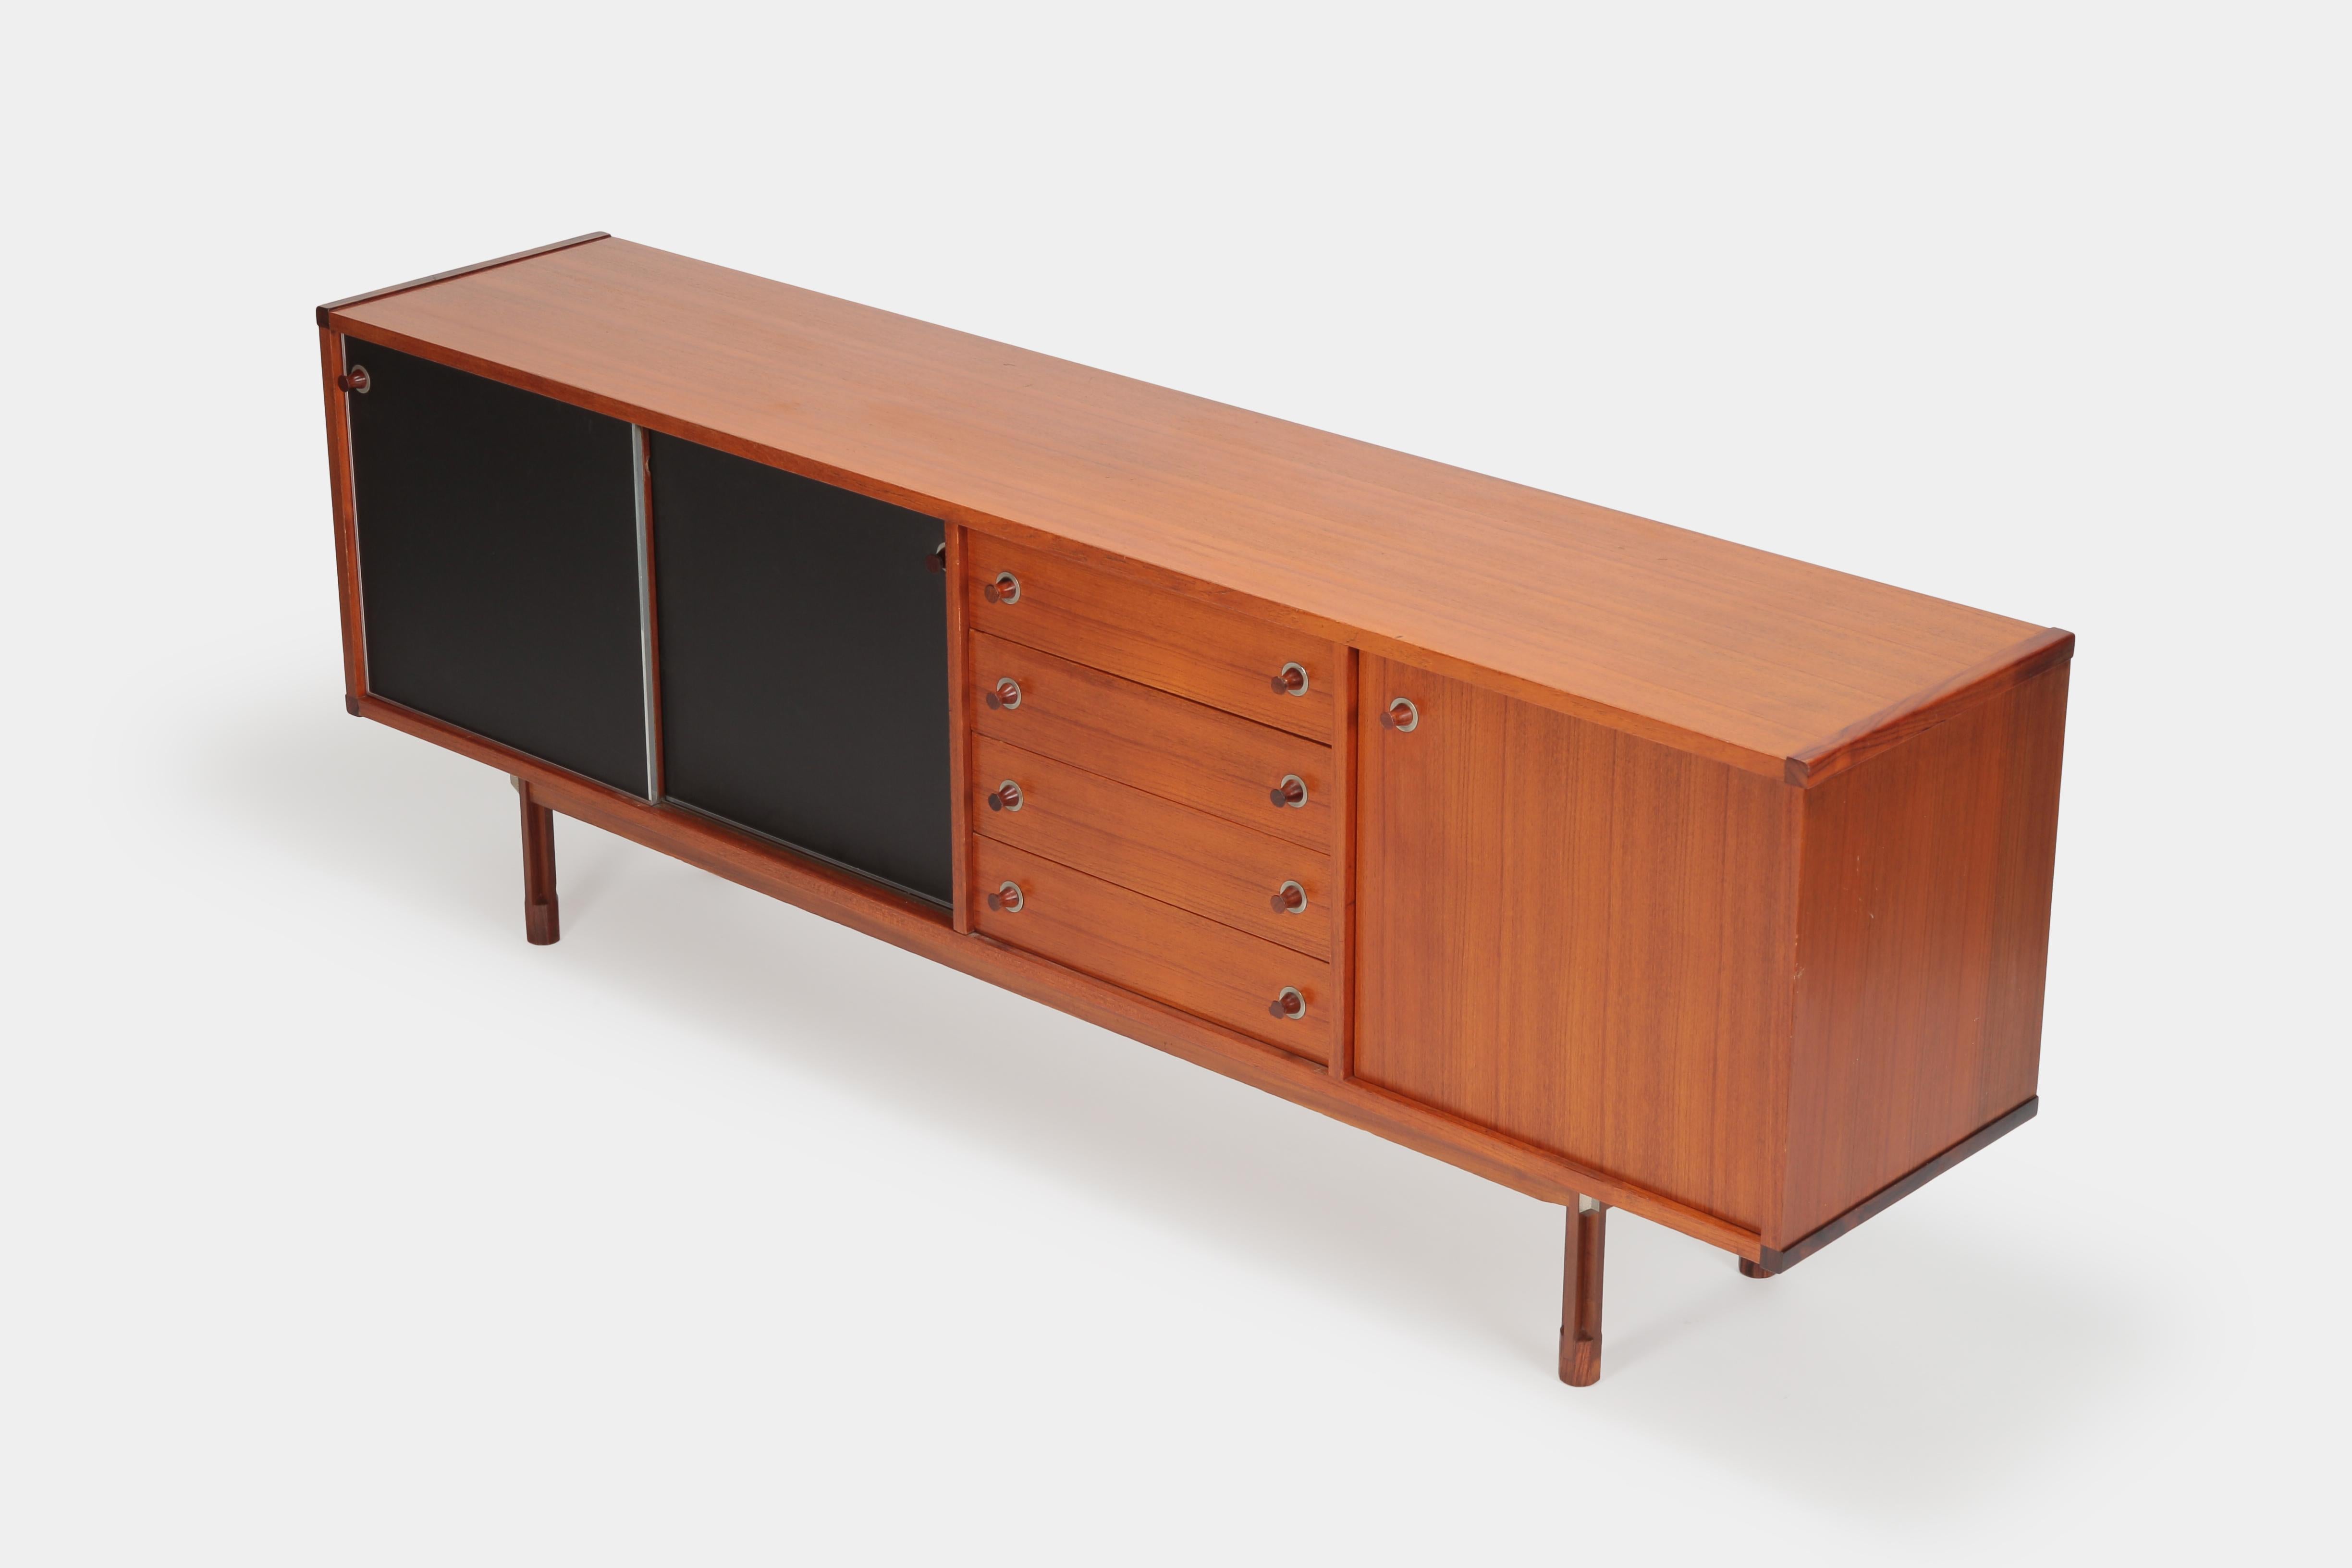 Ico Parisi sideboard manufactured by Stildomus in the 1960s in Italy. The frame and the front of the drawers are veneered with teak wood. Beautiful details like the edges and handles made of solid rosewood and the front of the sliding doors are